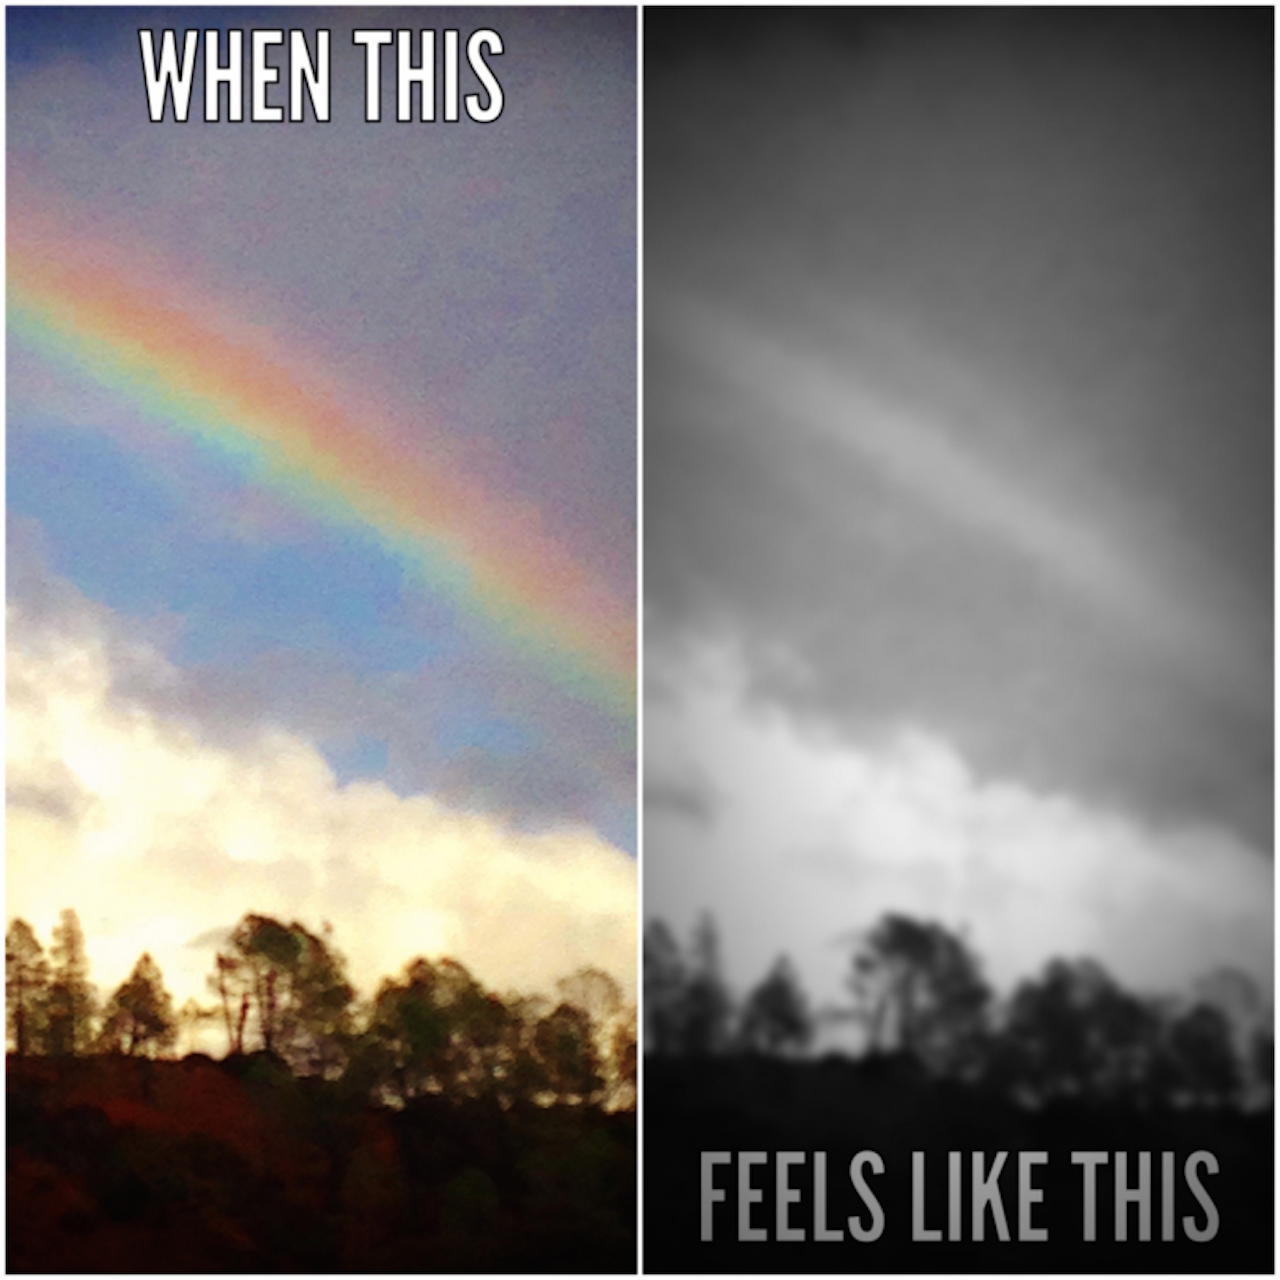 Two photos of a rainbow, one of colorful, the other is black and white